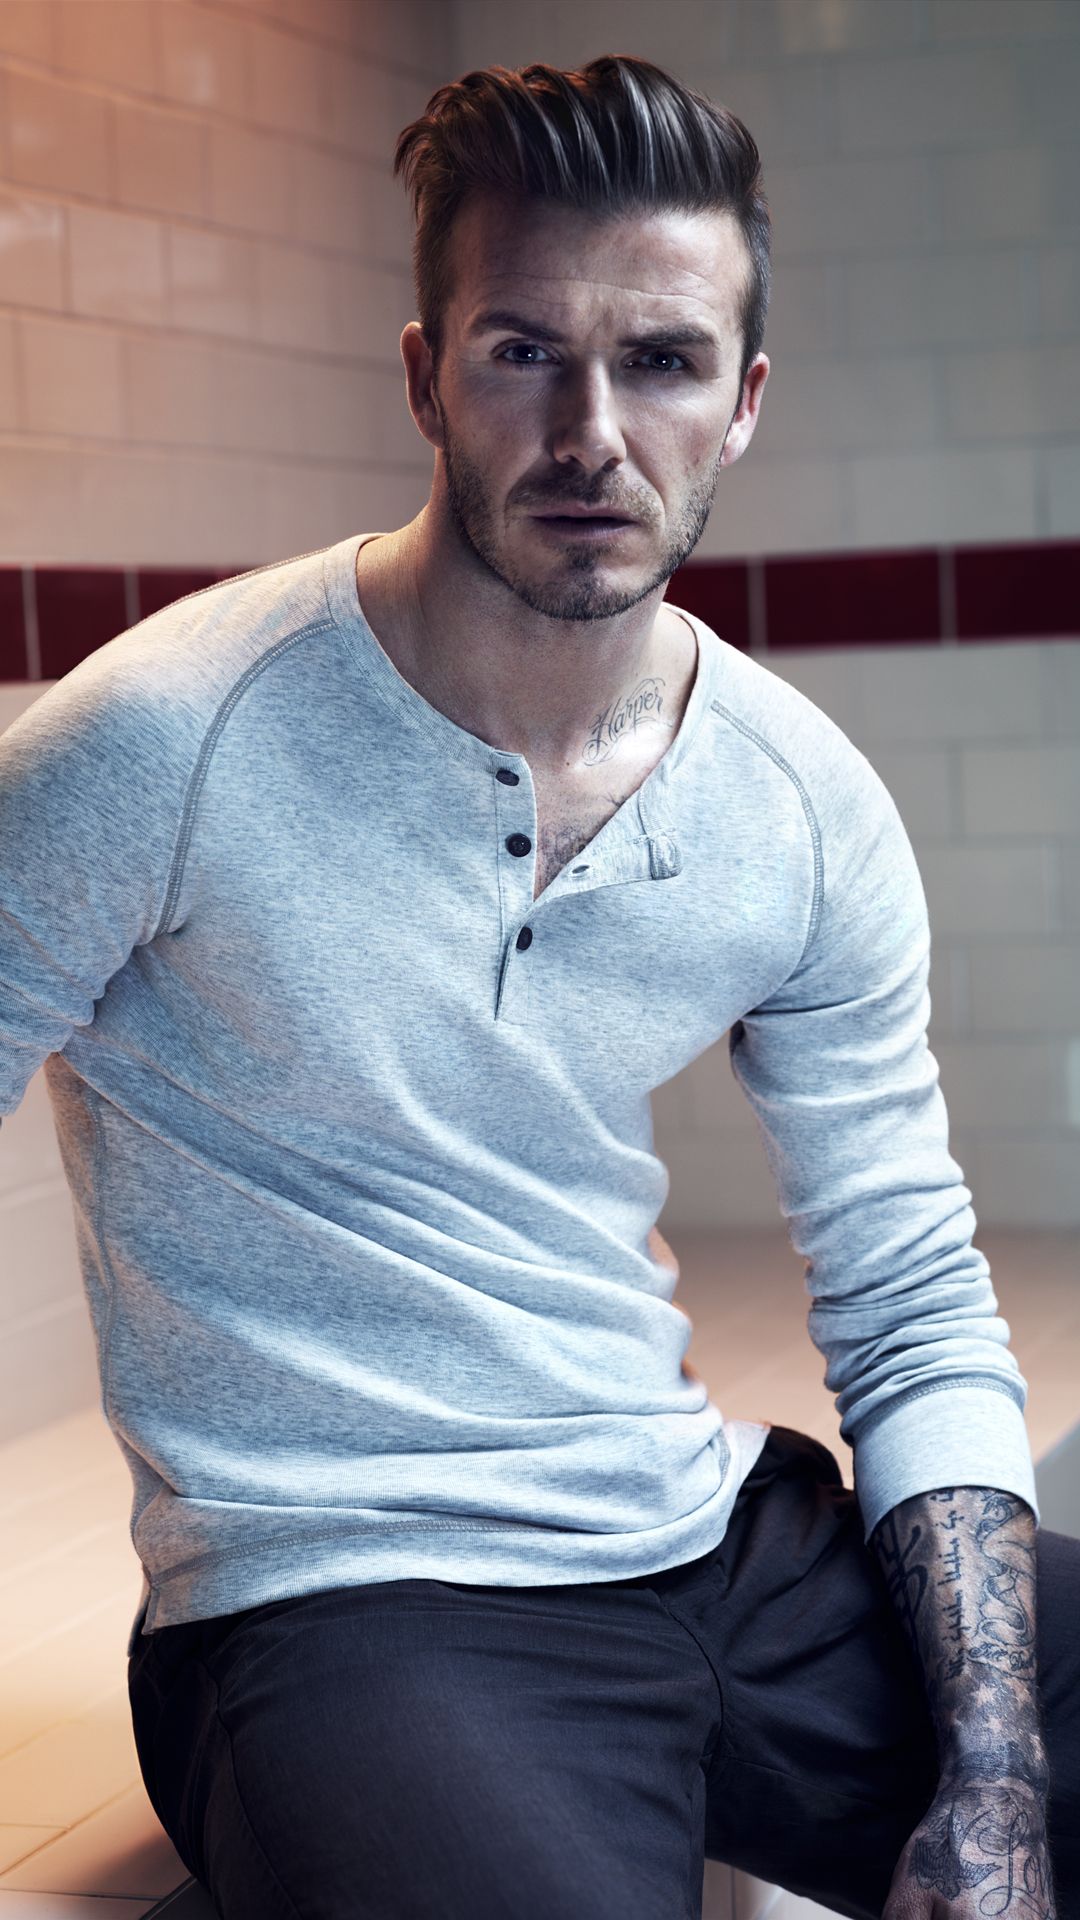 David Beckham Soccer htc one wallpaper, free and easy to